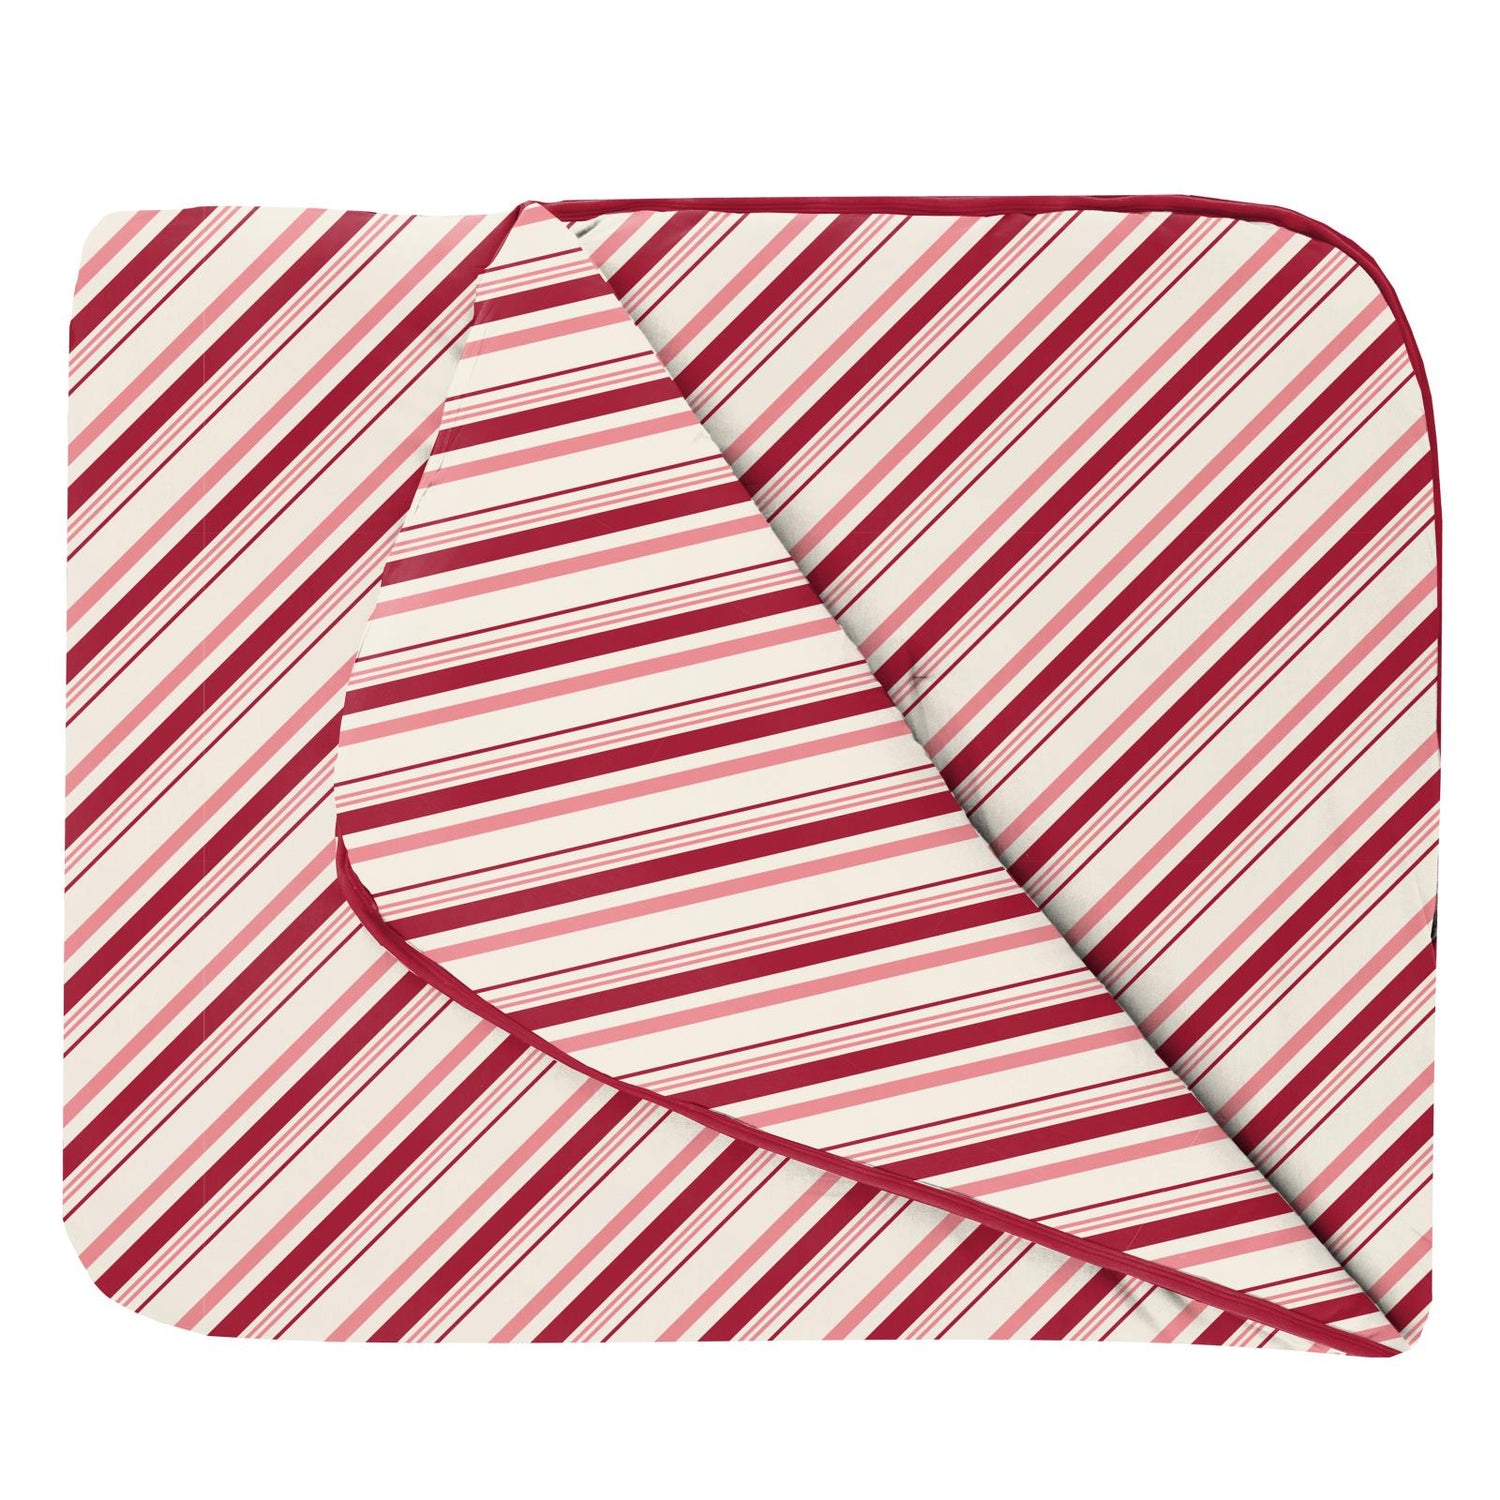 Print Fluffle Toddler Blanket in Strawberry Candy Cane Stripe